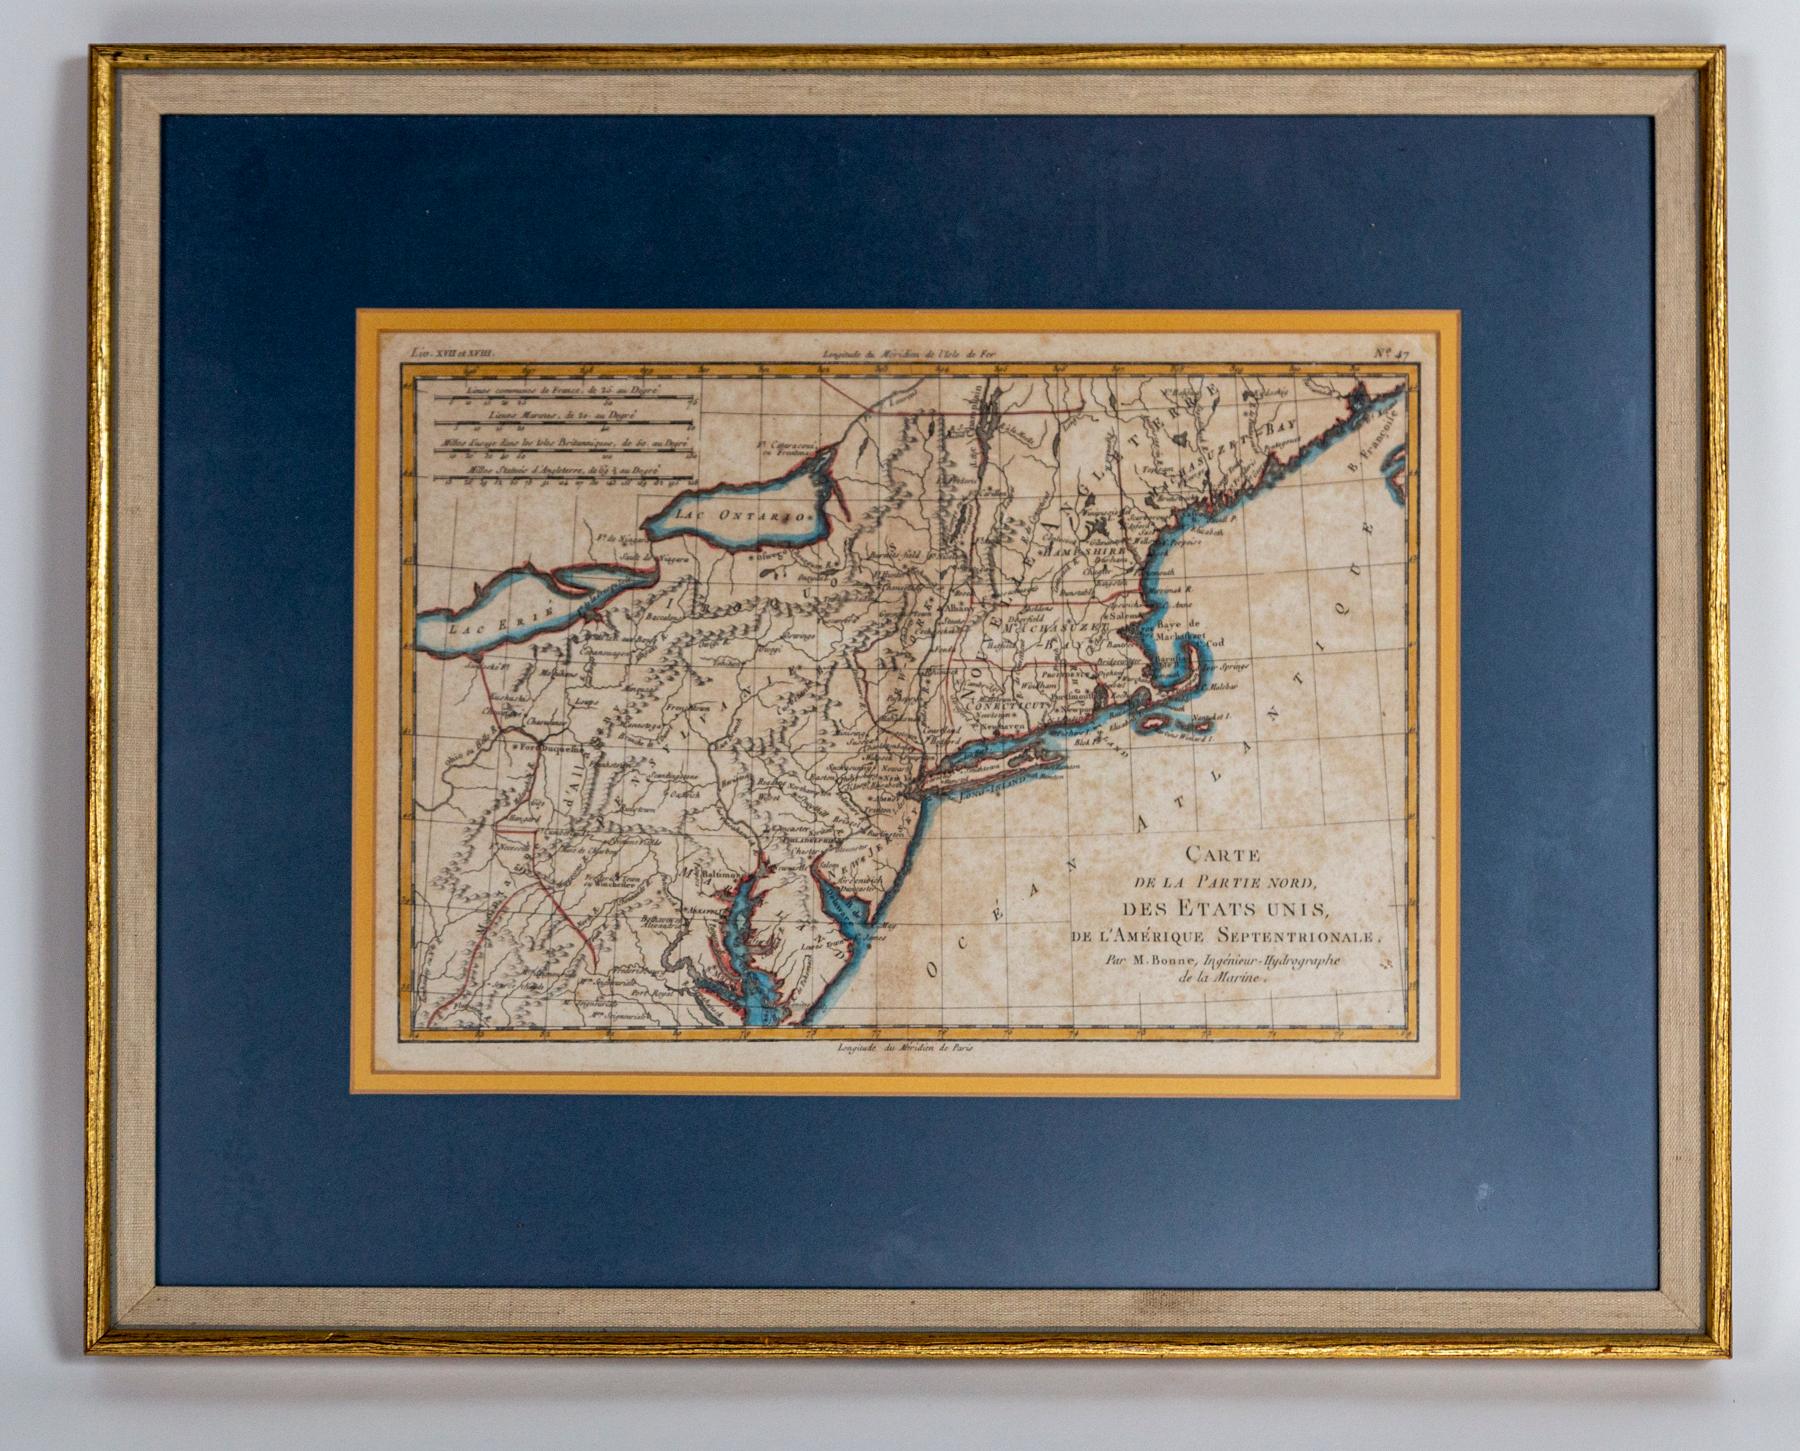 Hand-colored French map, Carte de la Partie Nord, des Etats Unis, de l'Amérique Septentrionale, late 18th century. A French map of New England published at the end of the Revolutionary War from Raynal's Atlas. Rigobert Bonne (1727-1795) was Royal